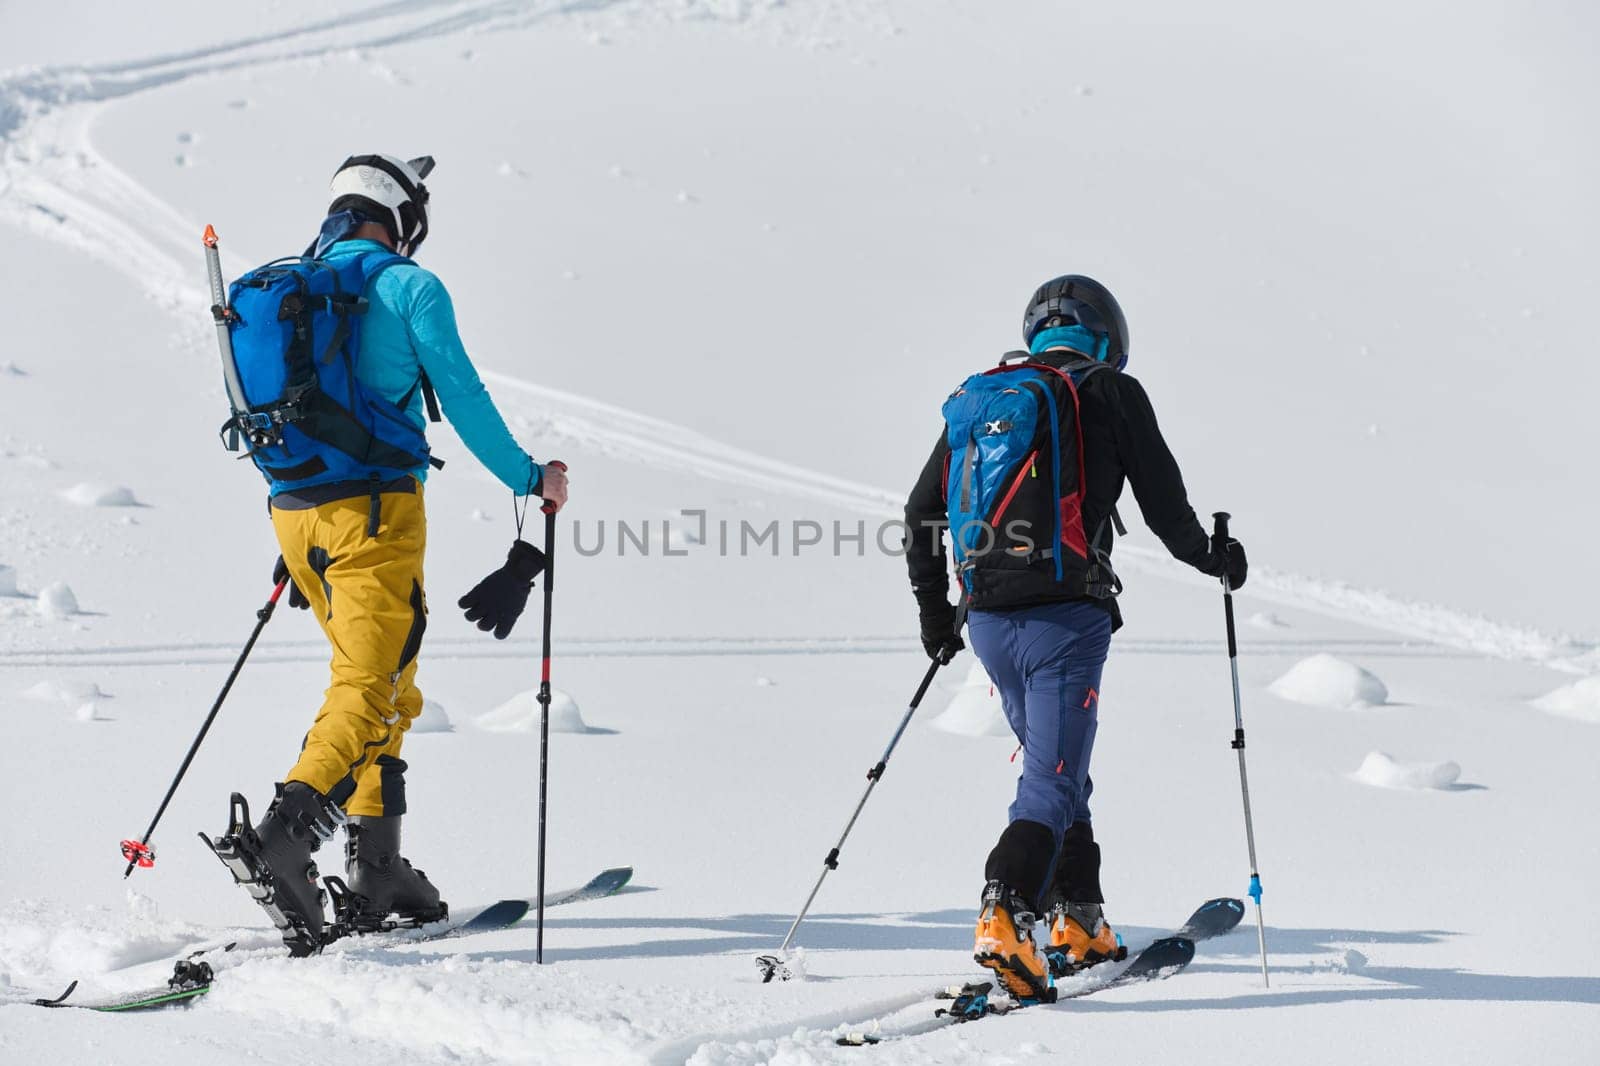 In a display of unwavering teamwork and determination, two professional skiers ascend the snow-capped peaks of the Alps, united in their quest for the summit.